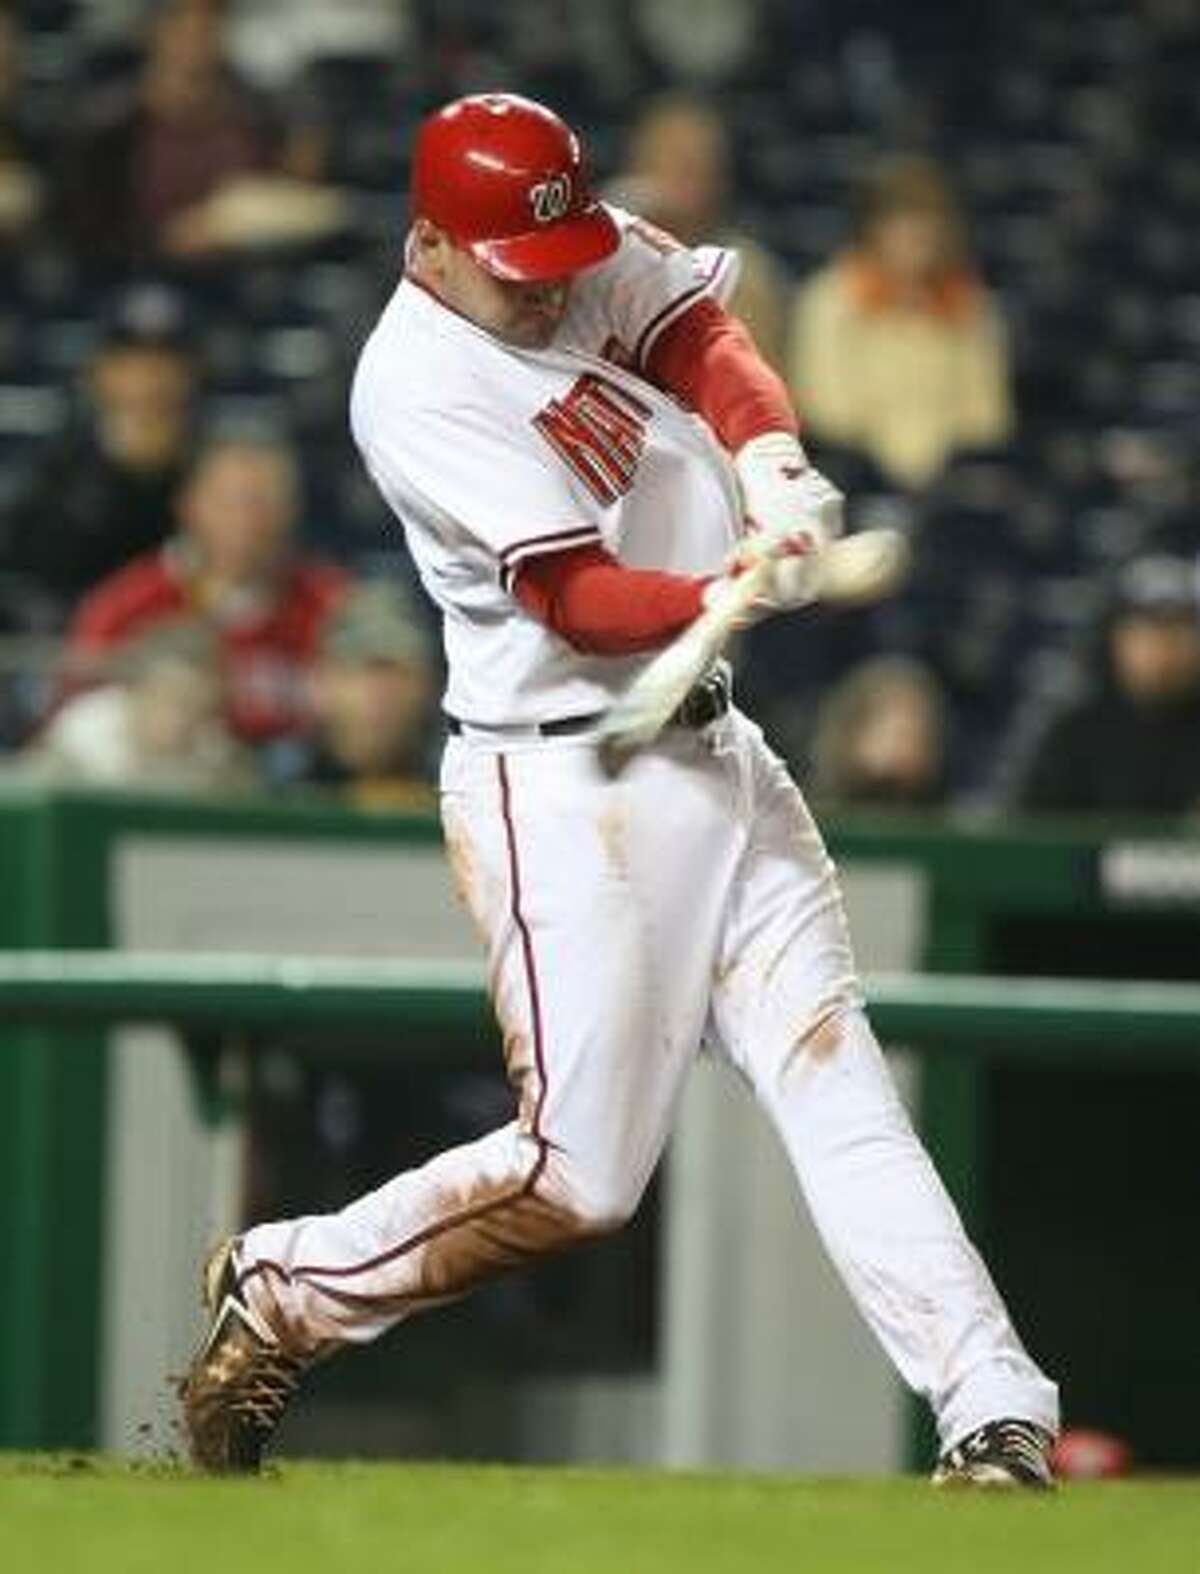 Washington's Ryan Zimmerman hits an RBI double in the seventh inning.